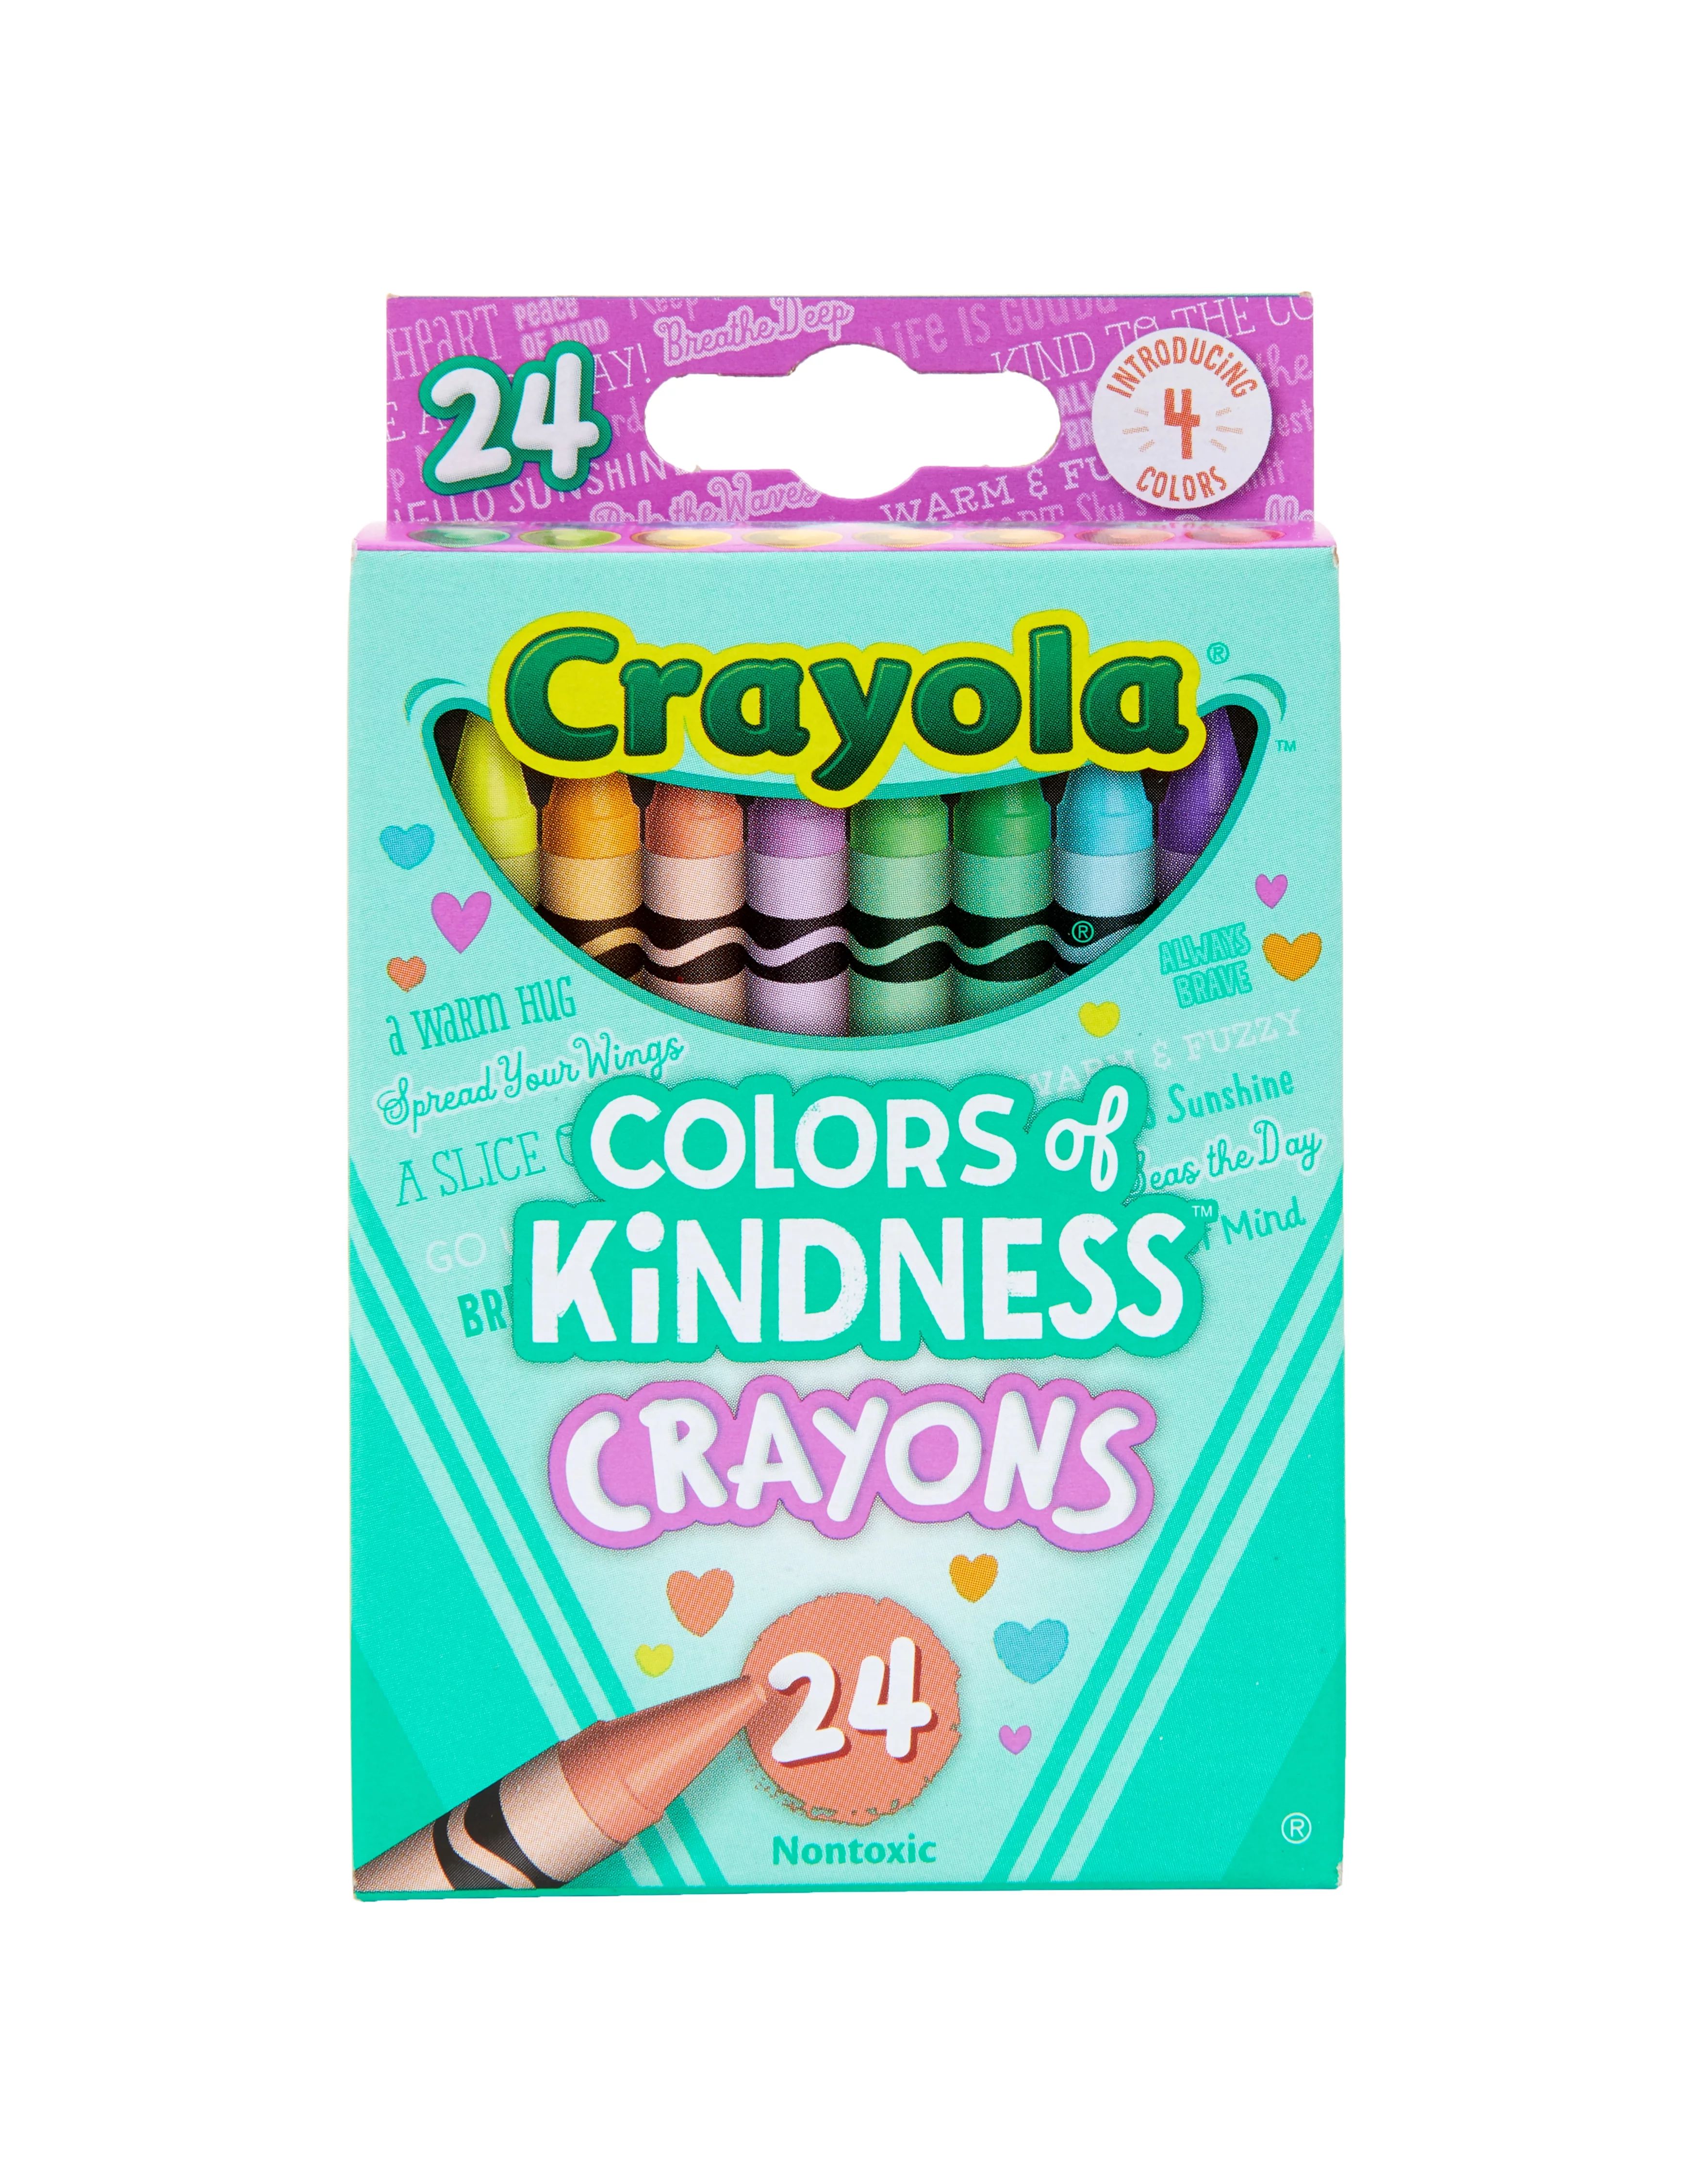 Crayola Colors of Kindness Crayons, 24 Count, Assorted Colors, Non-Toxic | Walmart (US)